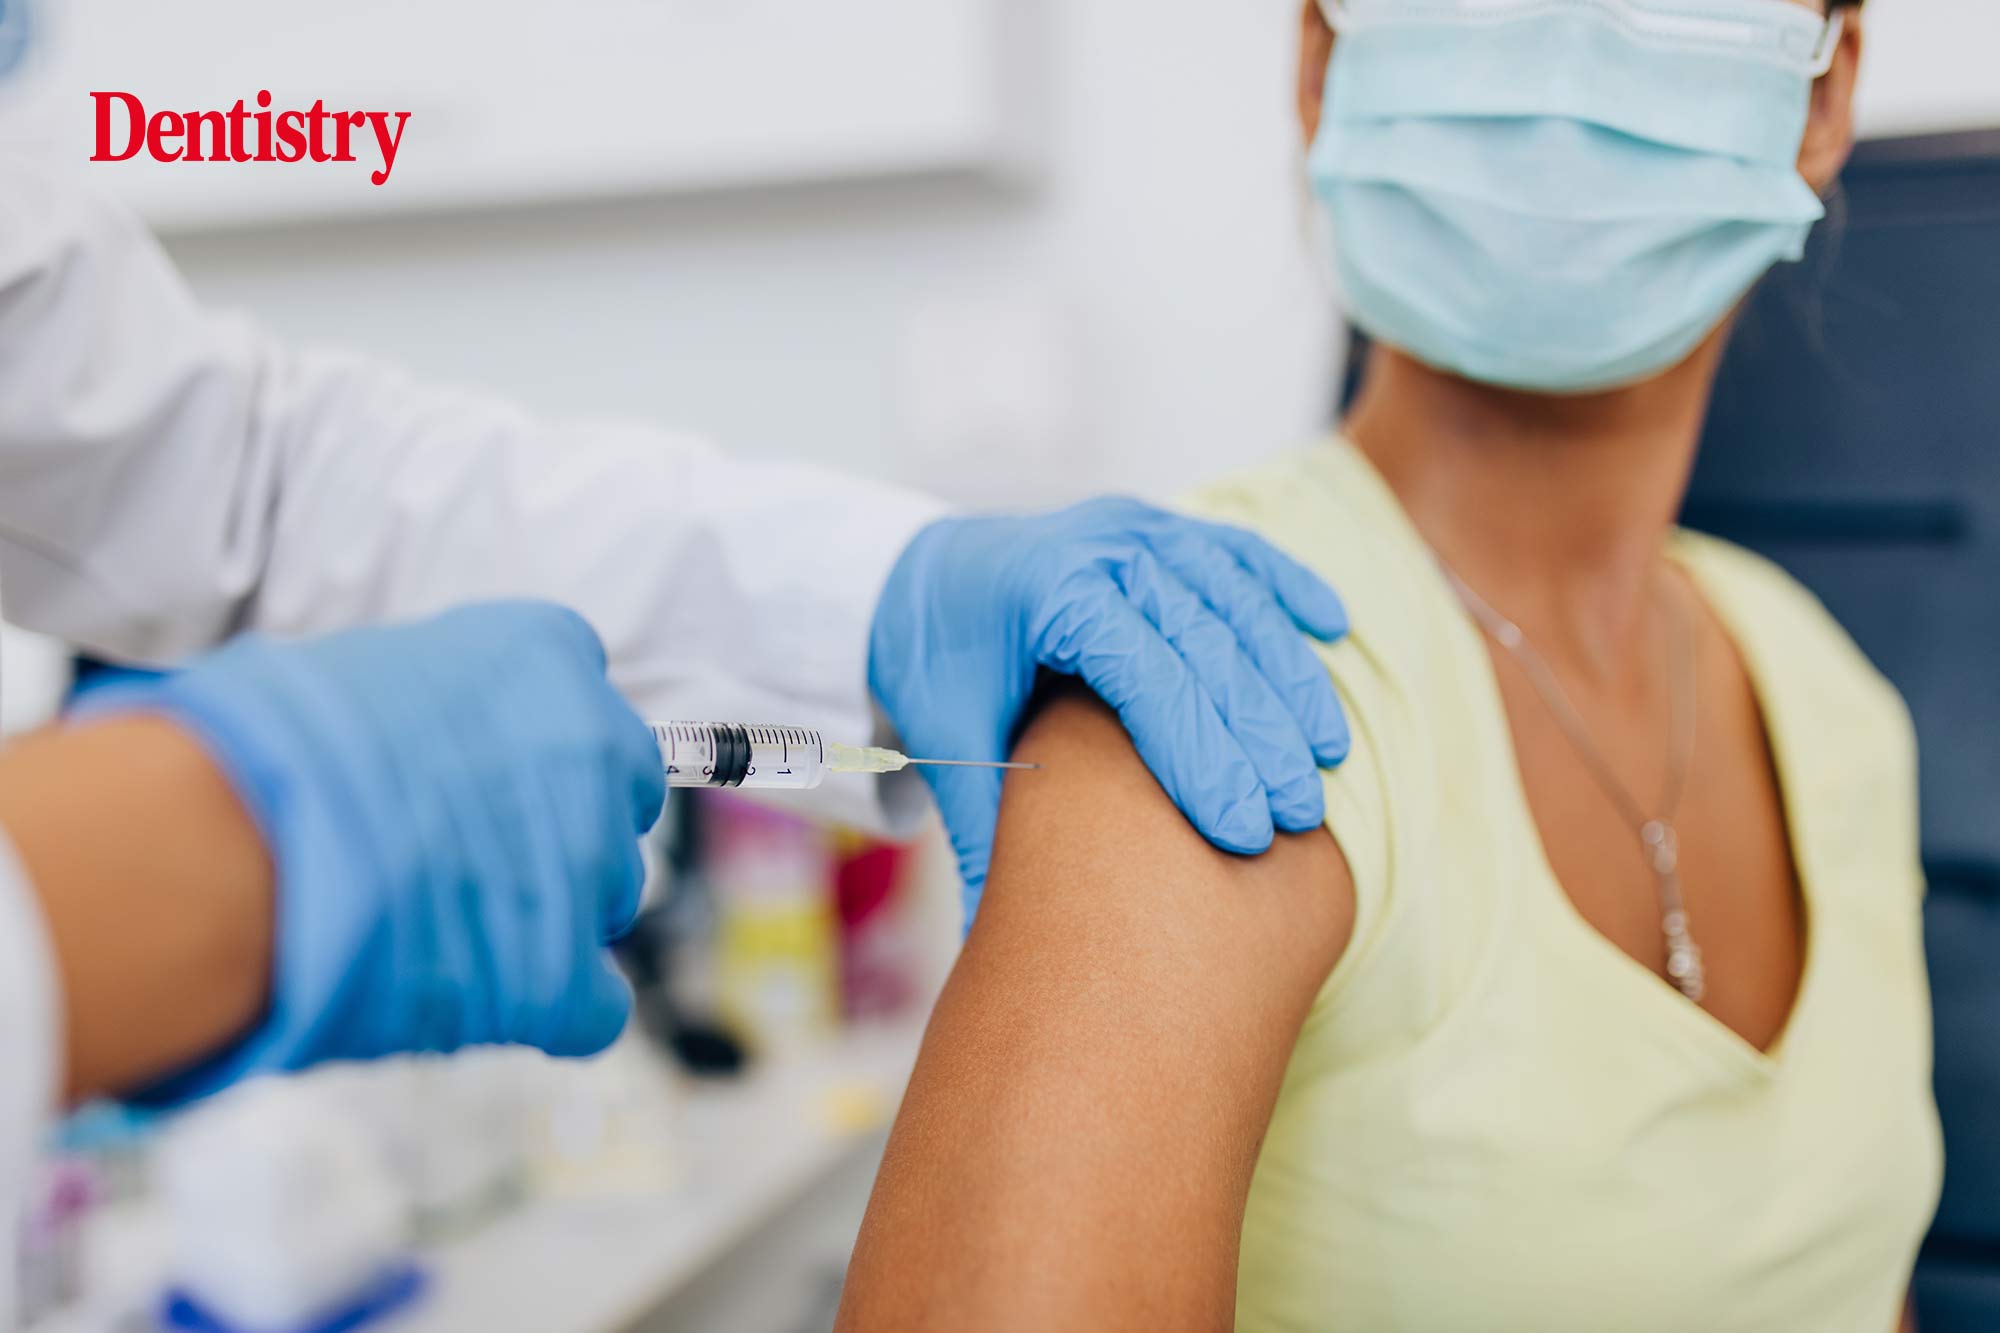 Almost one quarter of healthcare workers are hesitant to get the COVID-19 vaccine